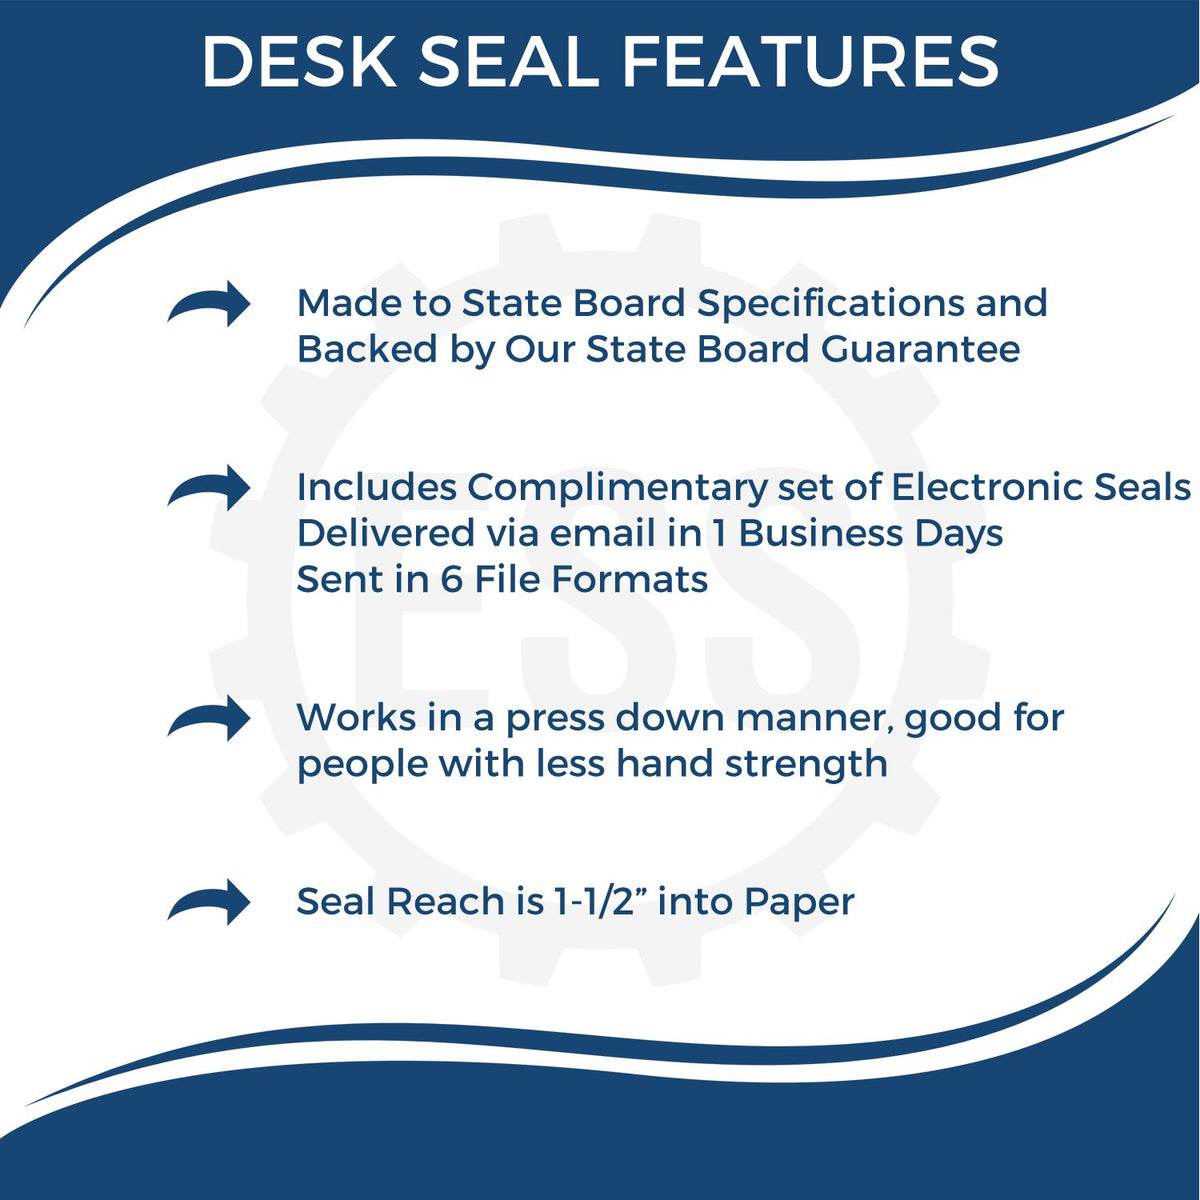 A picture of an infographic highlighting the selling points for the Arizona Desk Surveyor Seal Embosser